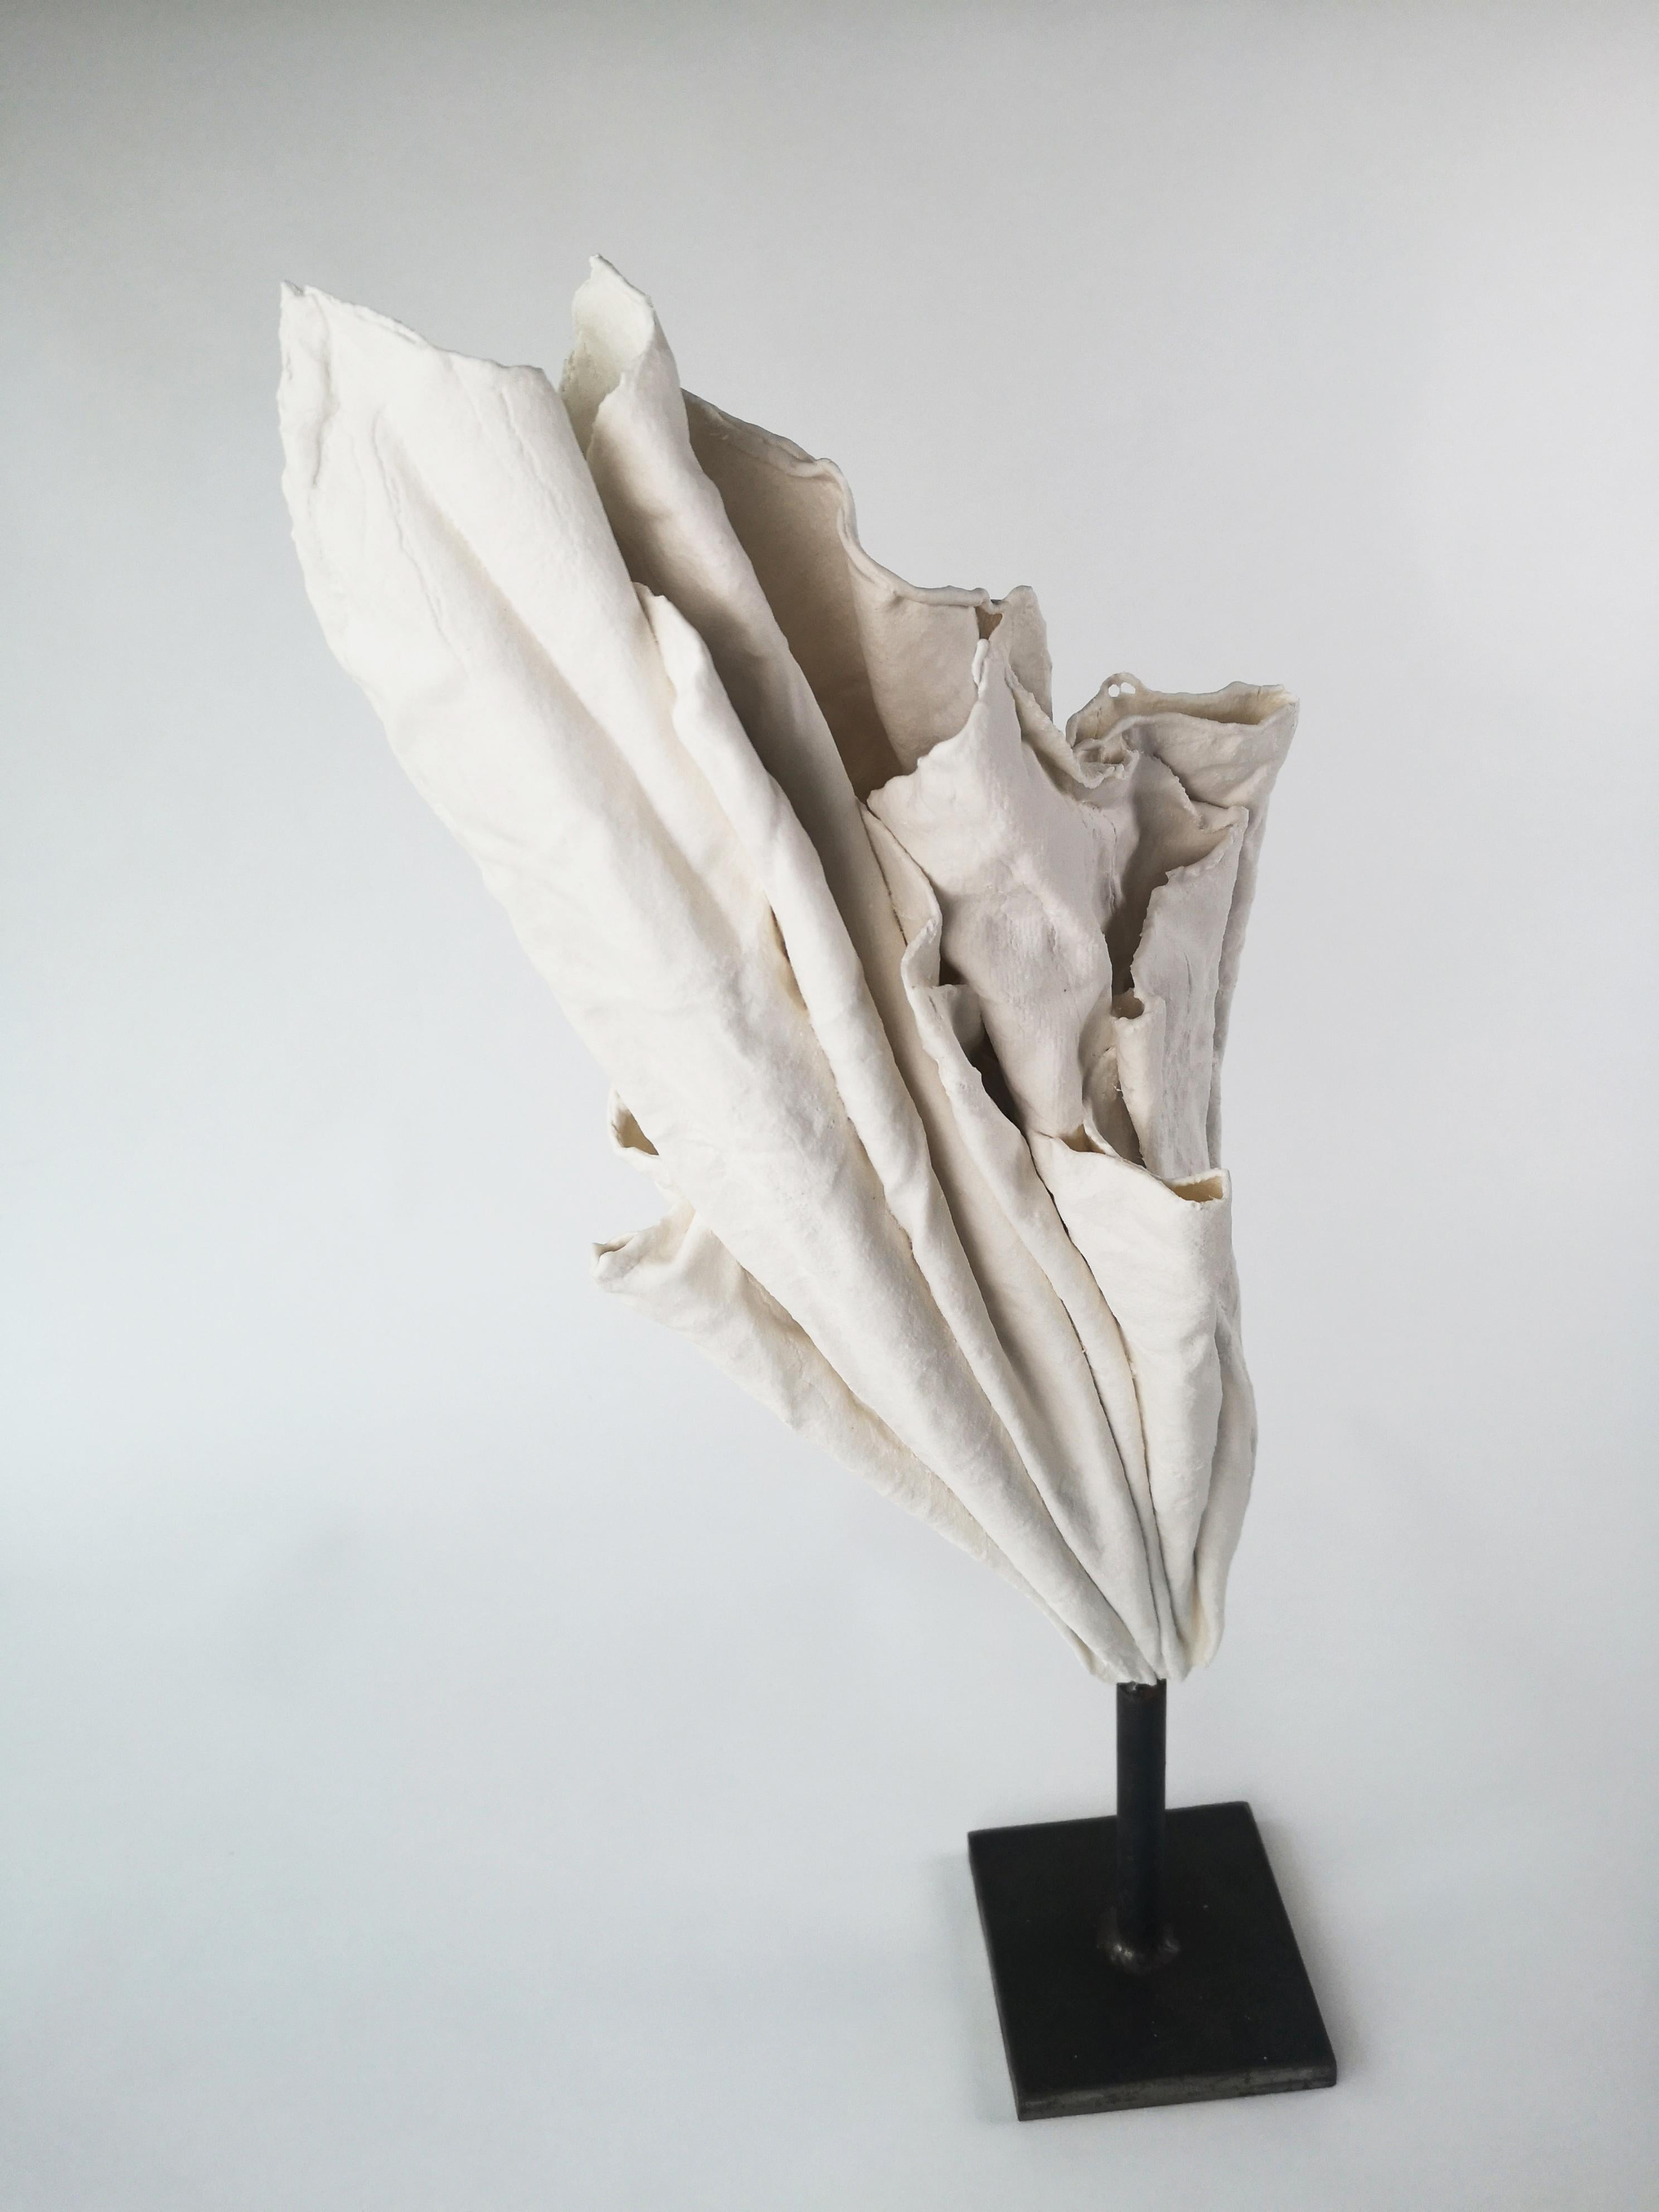 Fold III Sculpture by Dora Stanczel
One of a Kind.
Dimensions: D 14 x W 20 x H 60 cm.
Materials: Porcelain and beton pedestal.

I create bespoke and luxurious porcelain pieces with a careful aesthetic. Beyond the technical mastery of casting, what